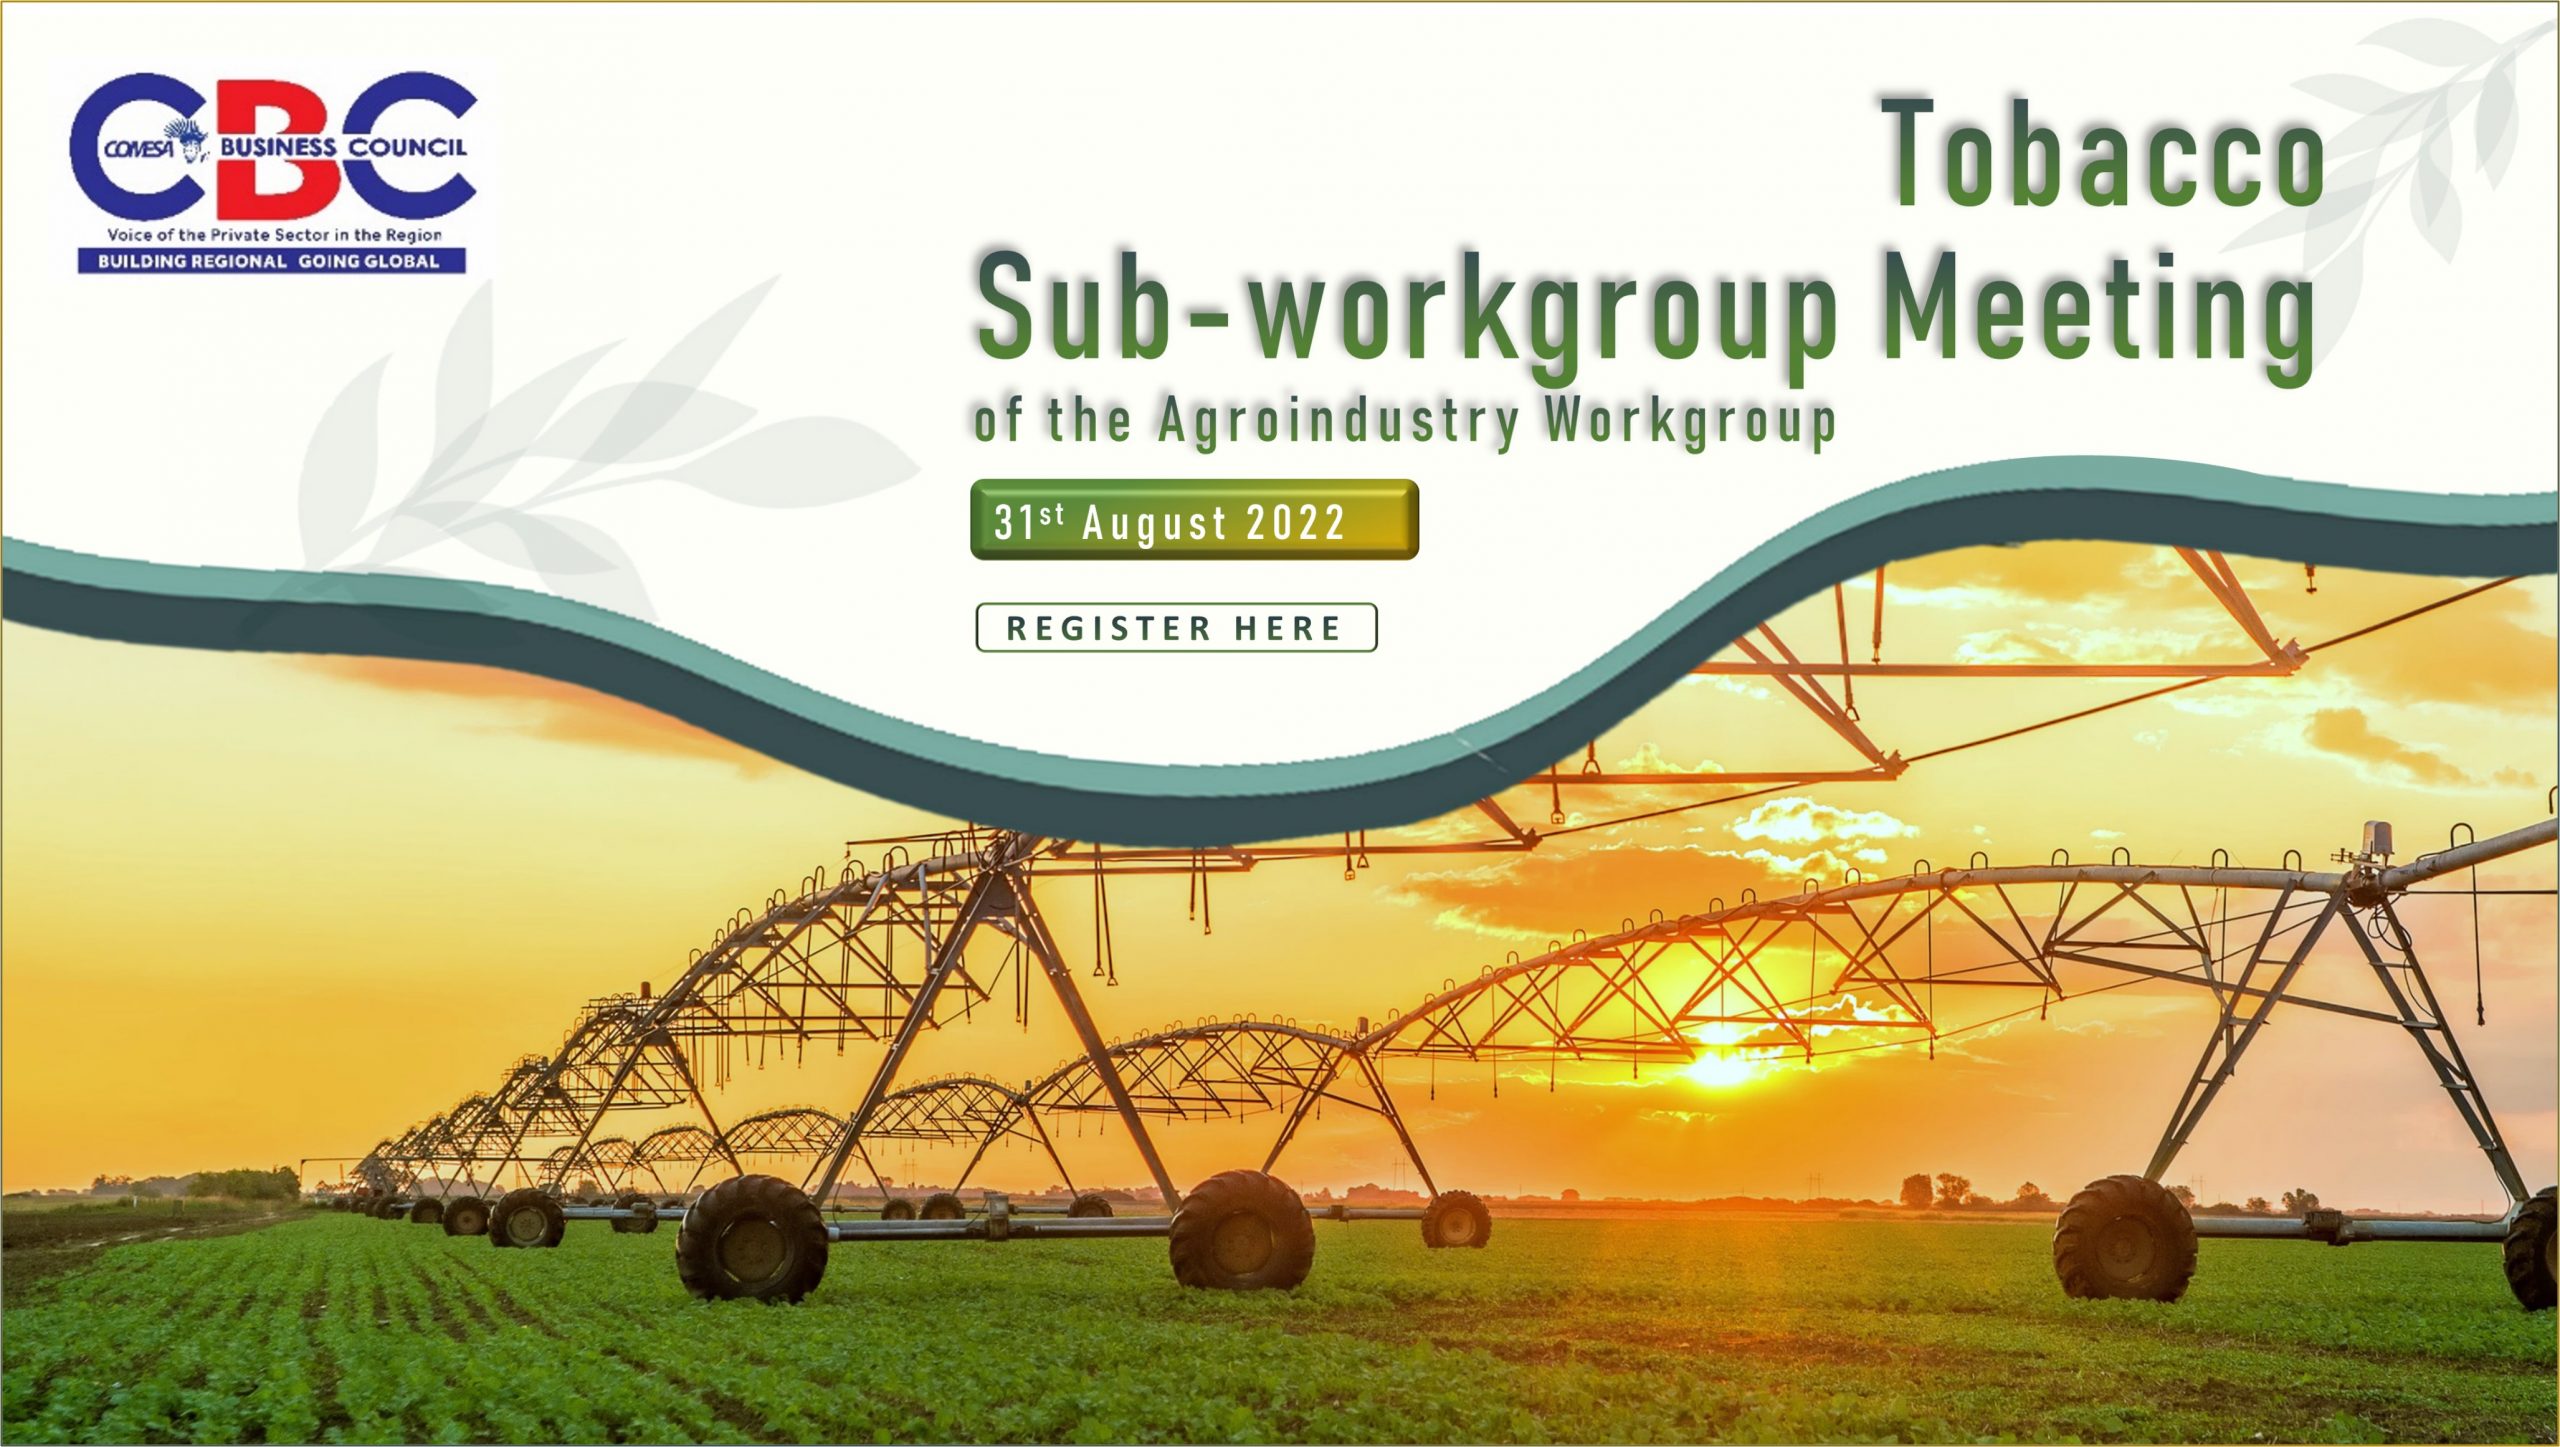 Tobacco Sub-workgroup Meeting of the Agroindustry Workgroup